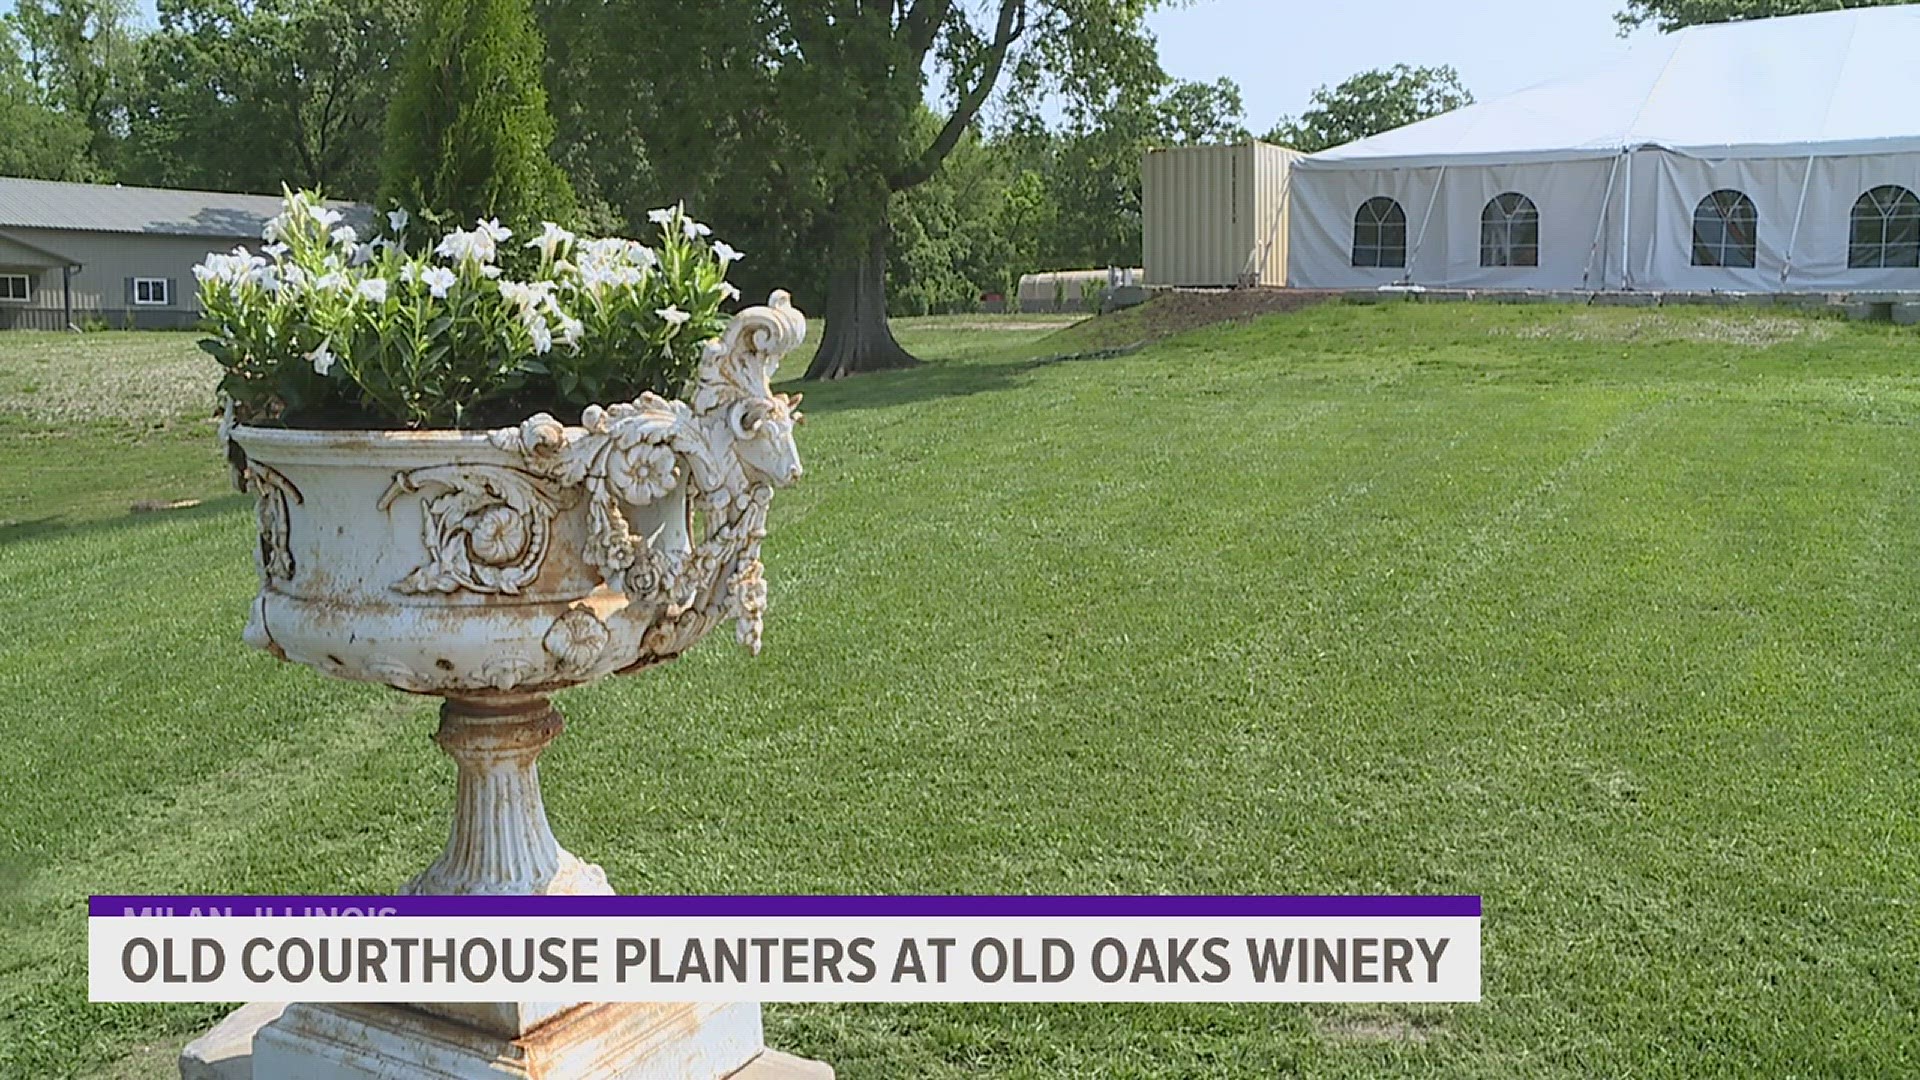 After the old courthouse was demolished, the planters ended up in the hands of the American Pickers who sold them to Old Oaks Winery.